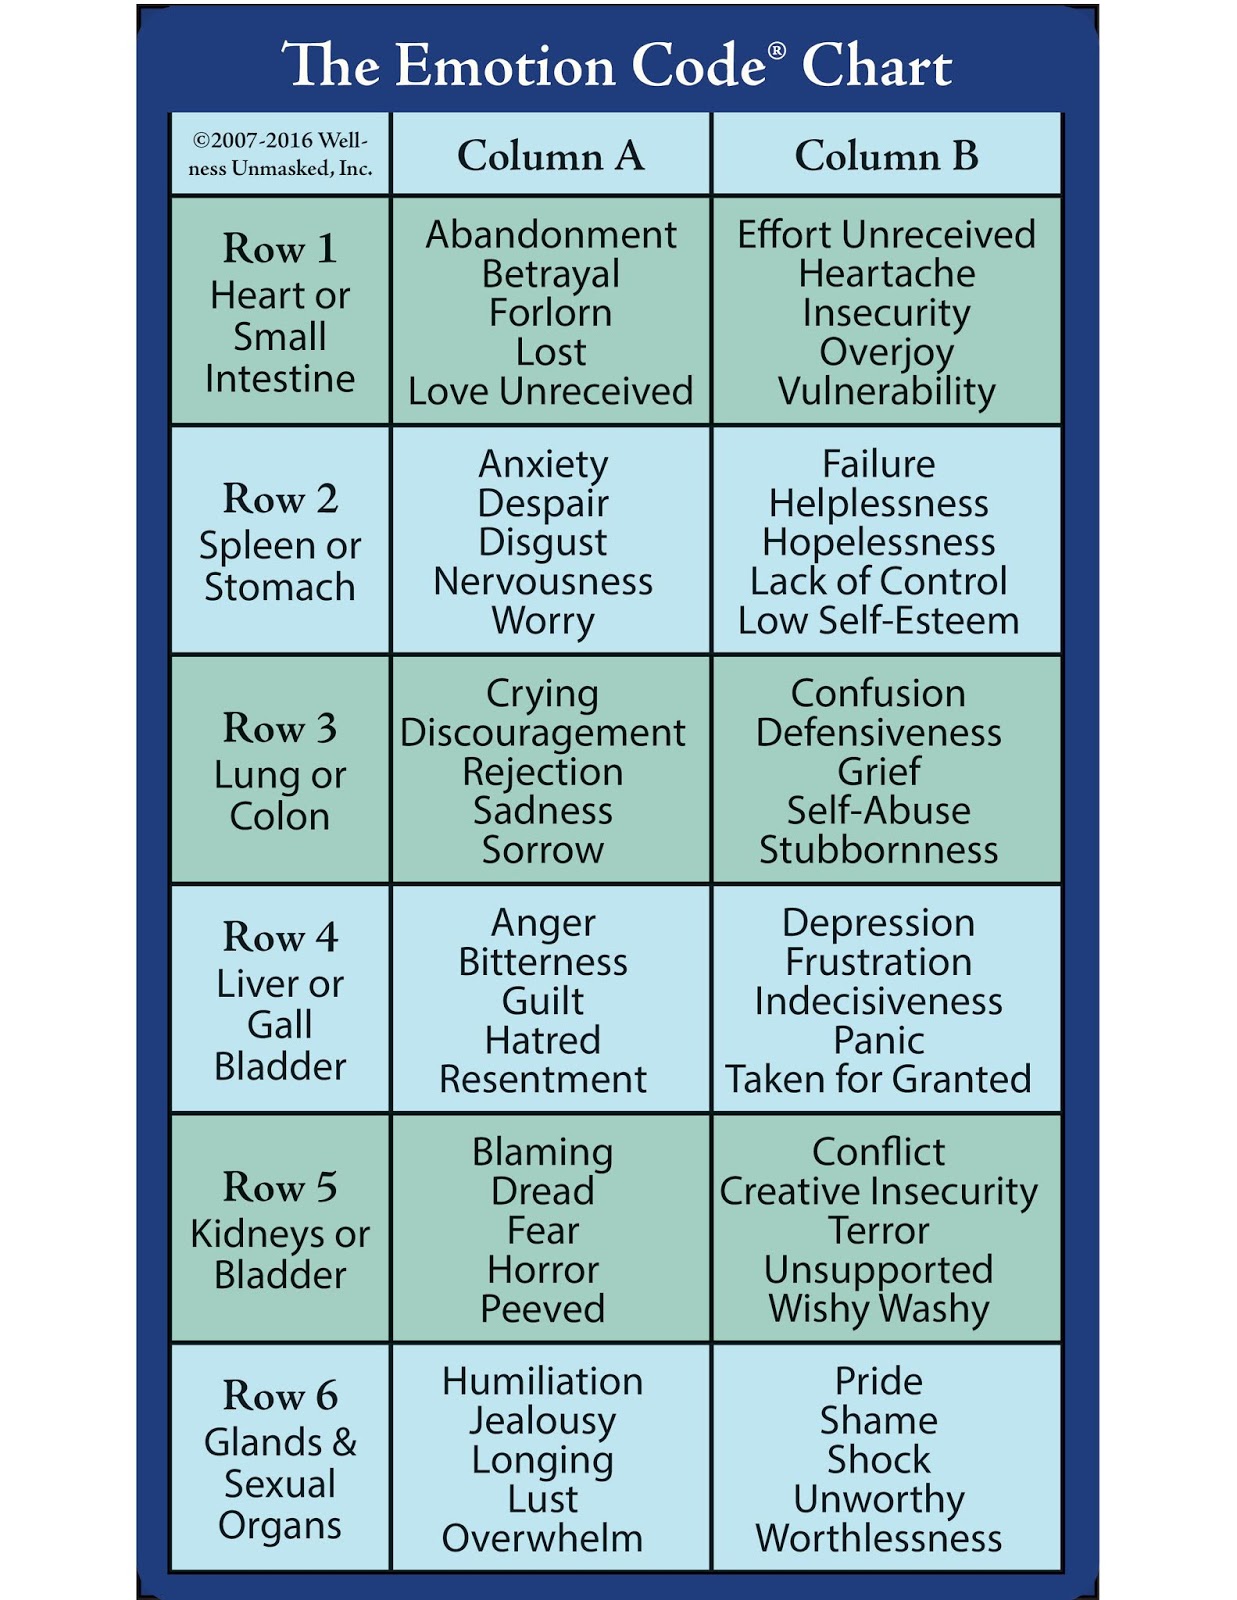 The Emotion Code Chart